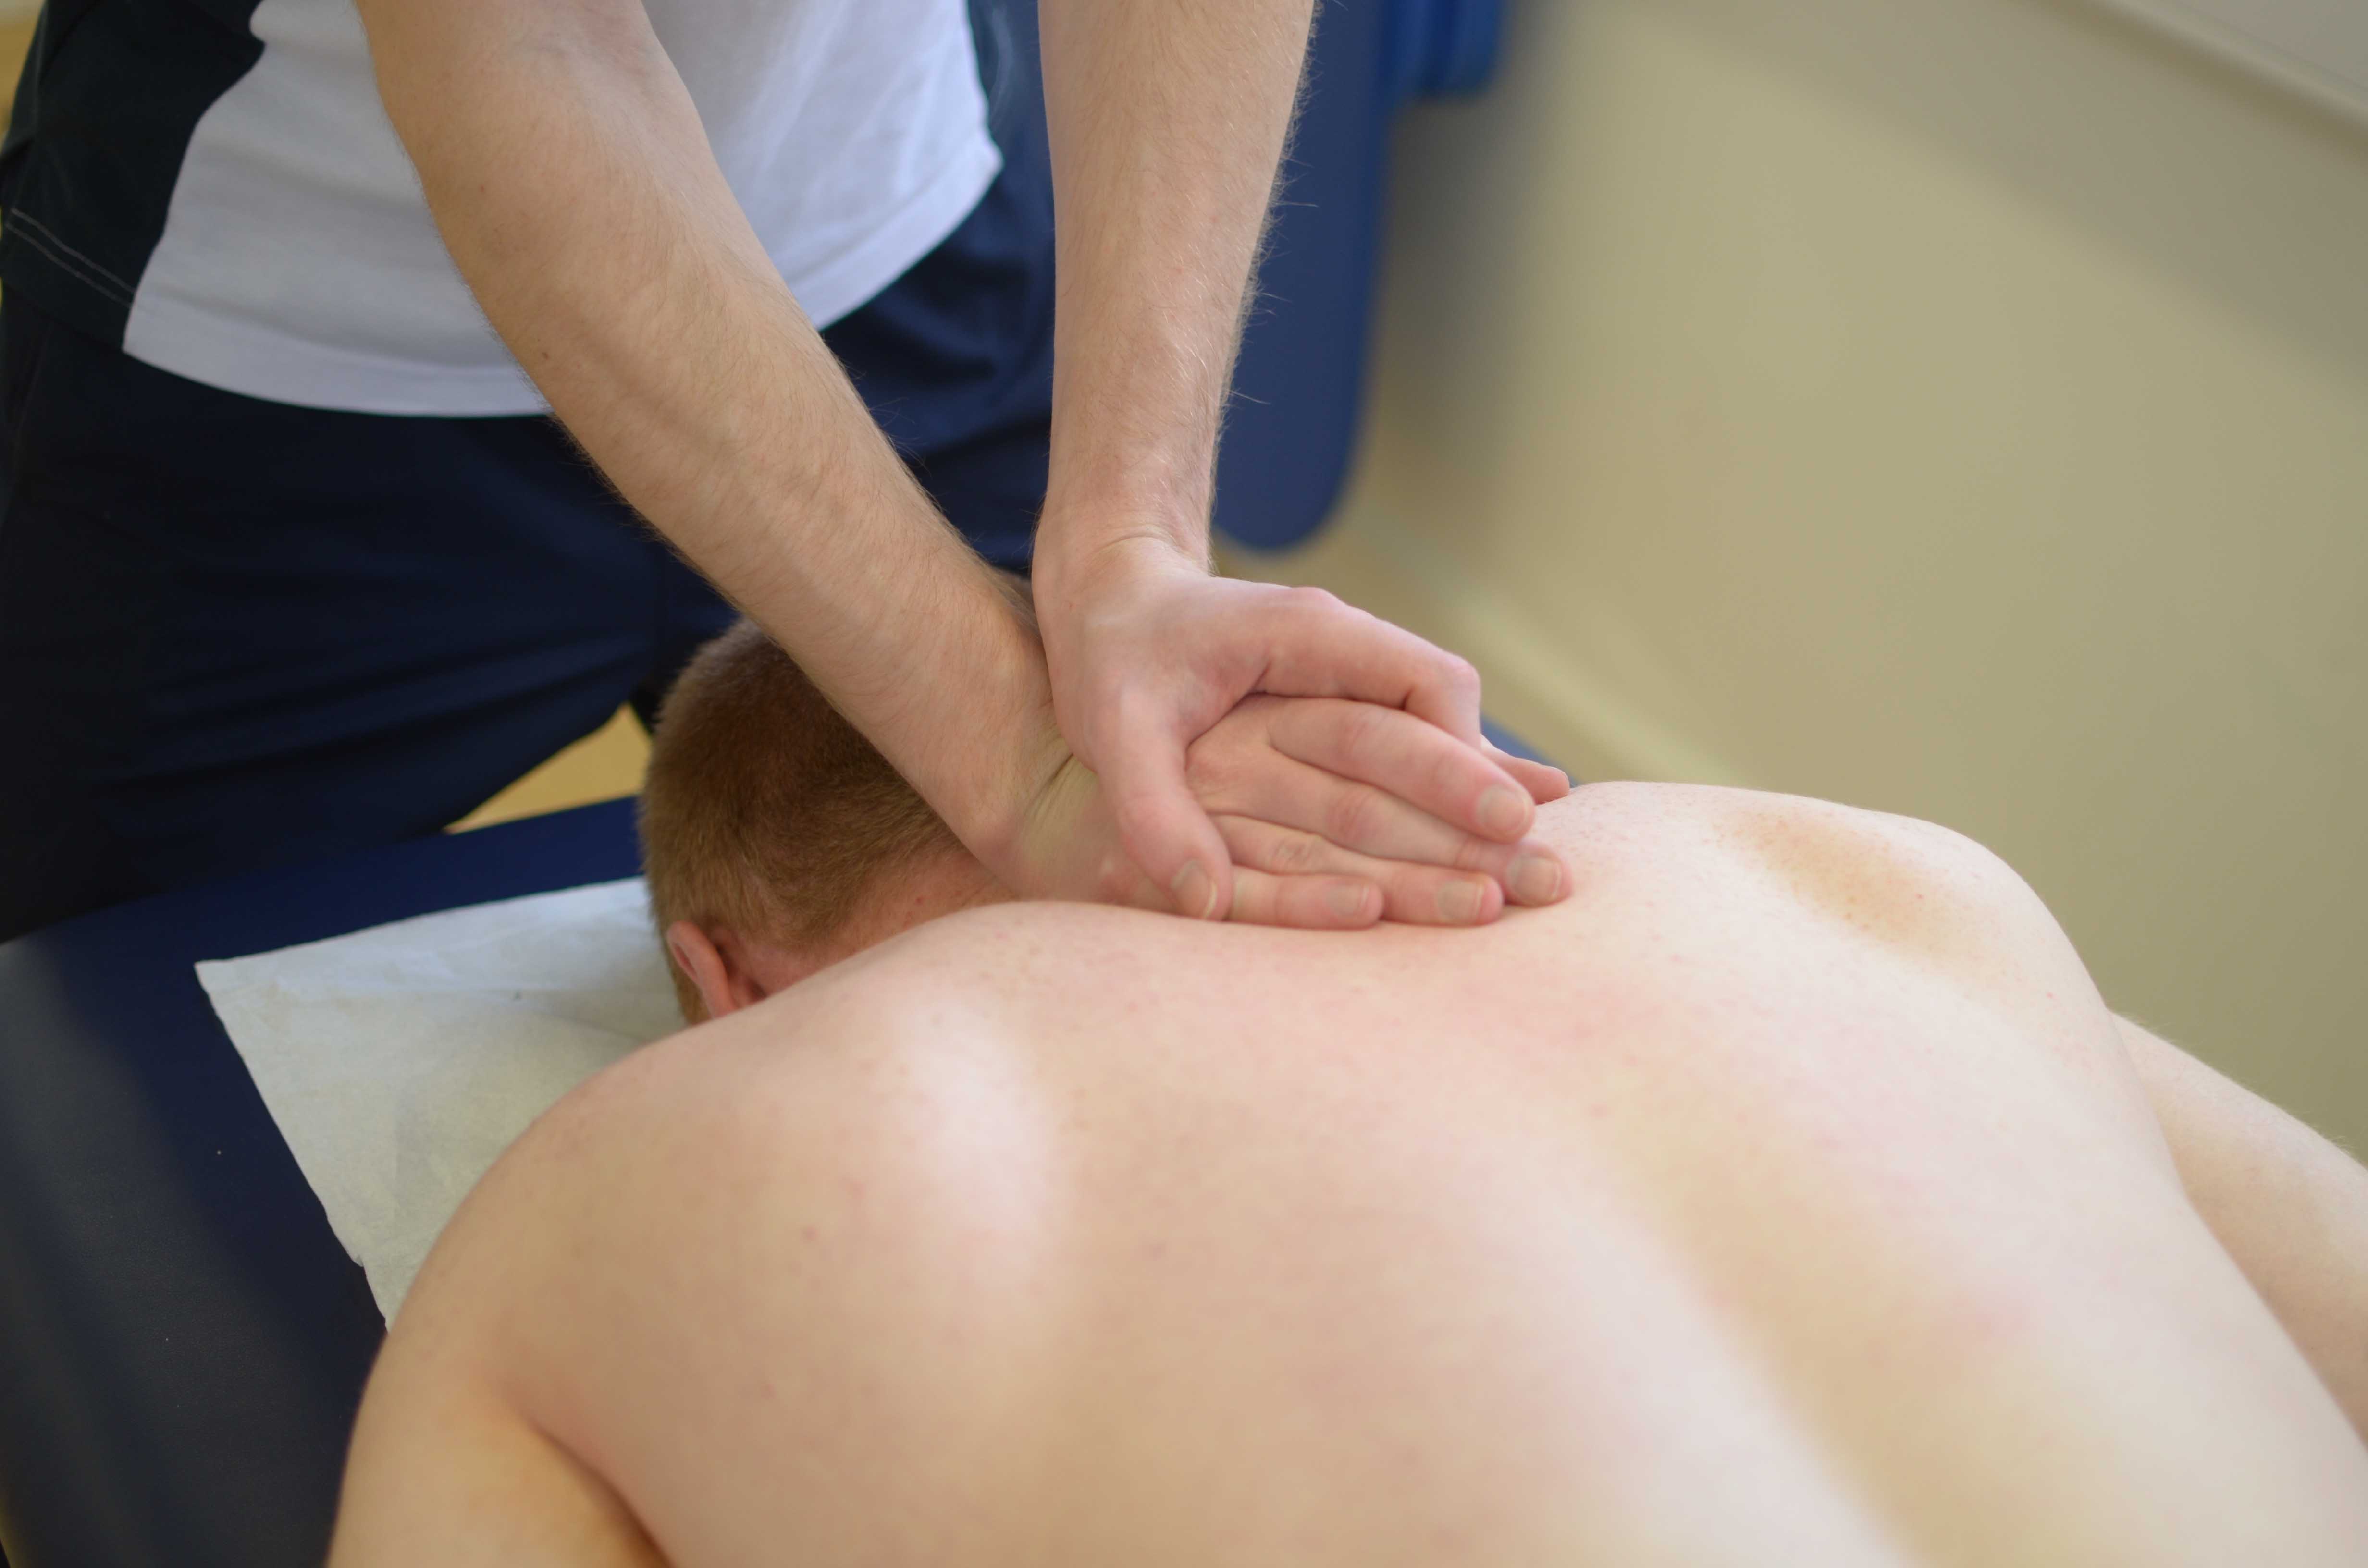 Soft Tissue Mobilisation - Manual Therapy - Physiotherapy - Treatments 